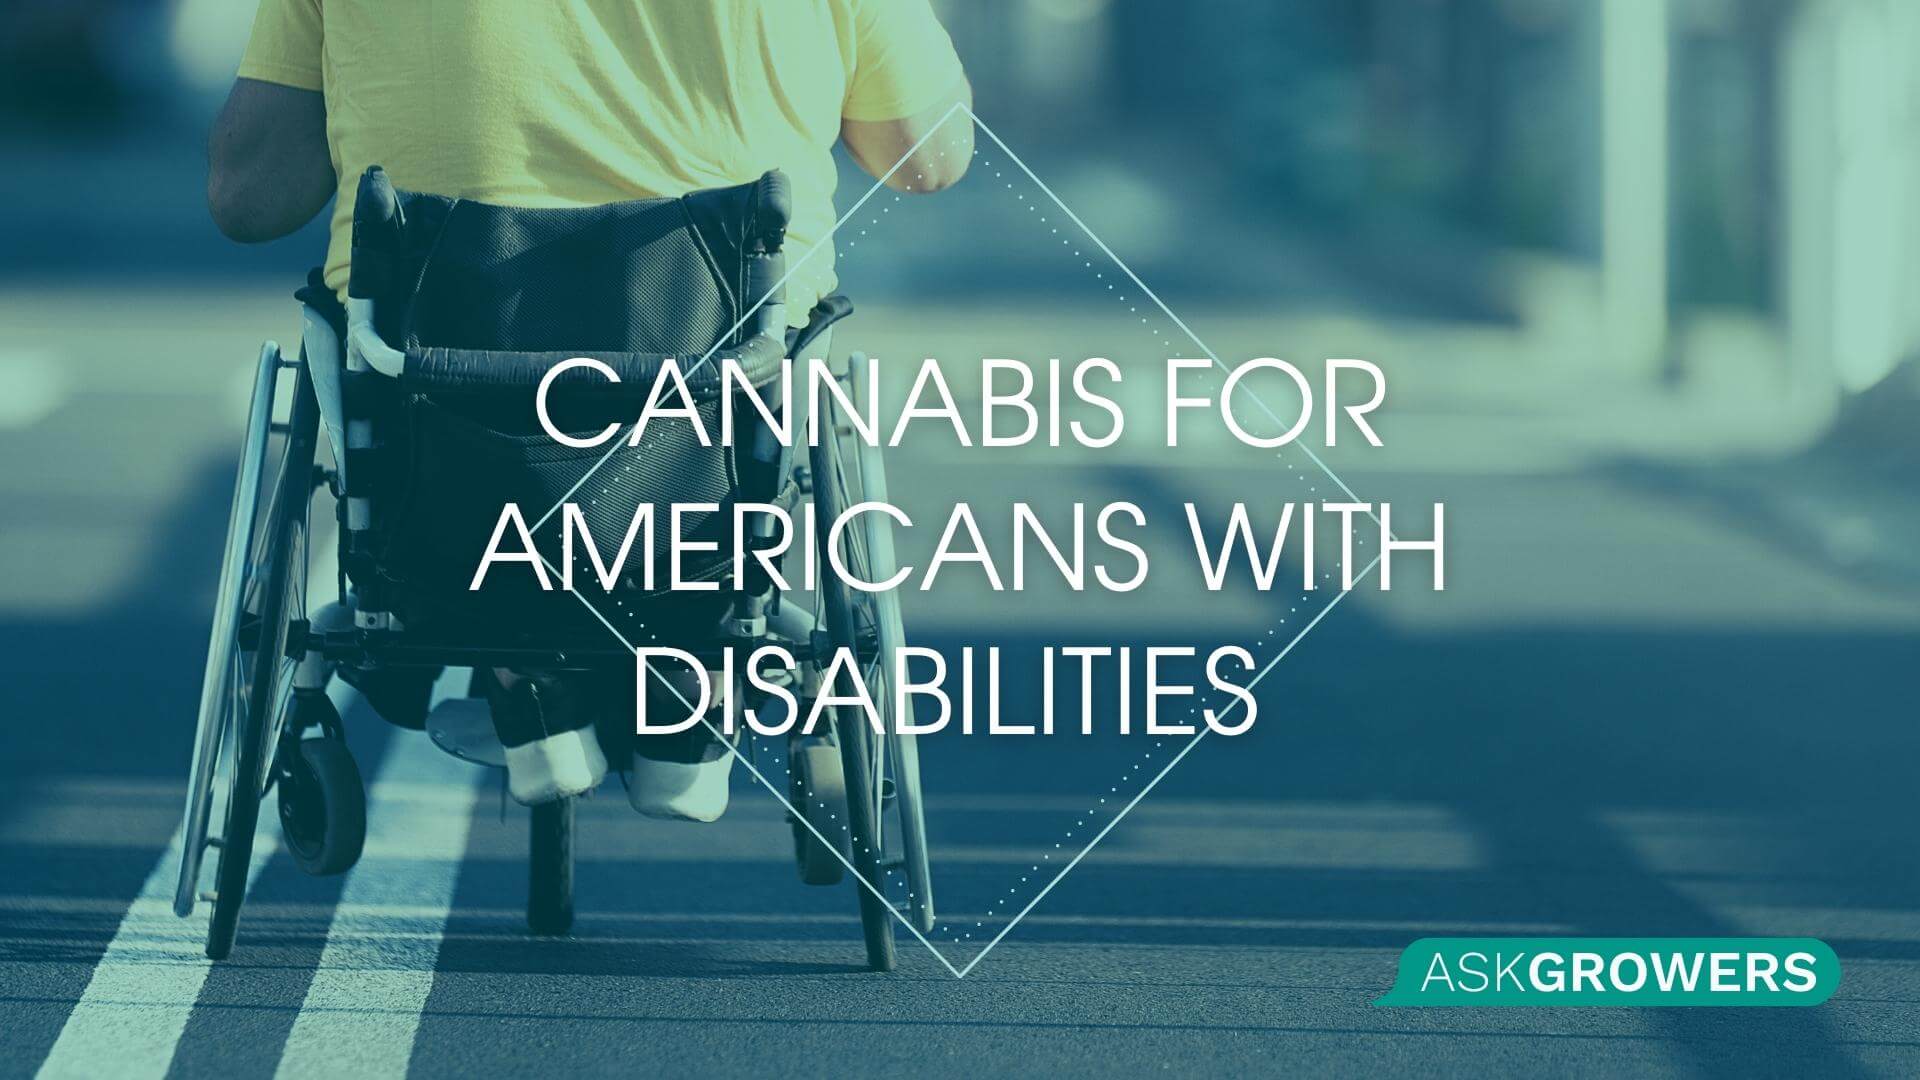 Americans With Disabilities Find New Relief and Freedom With Cannabis